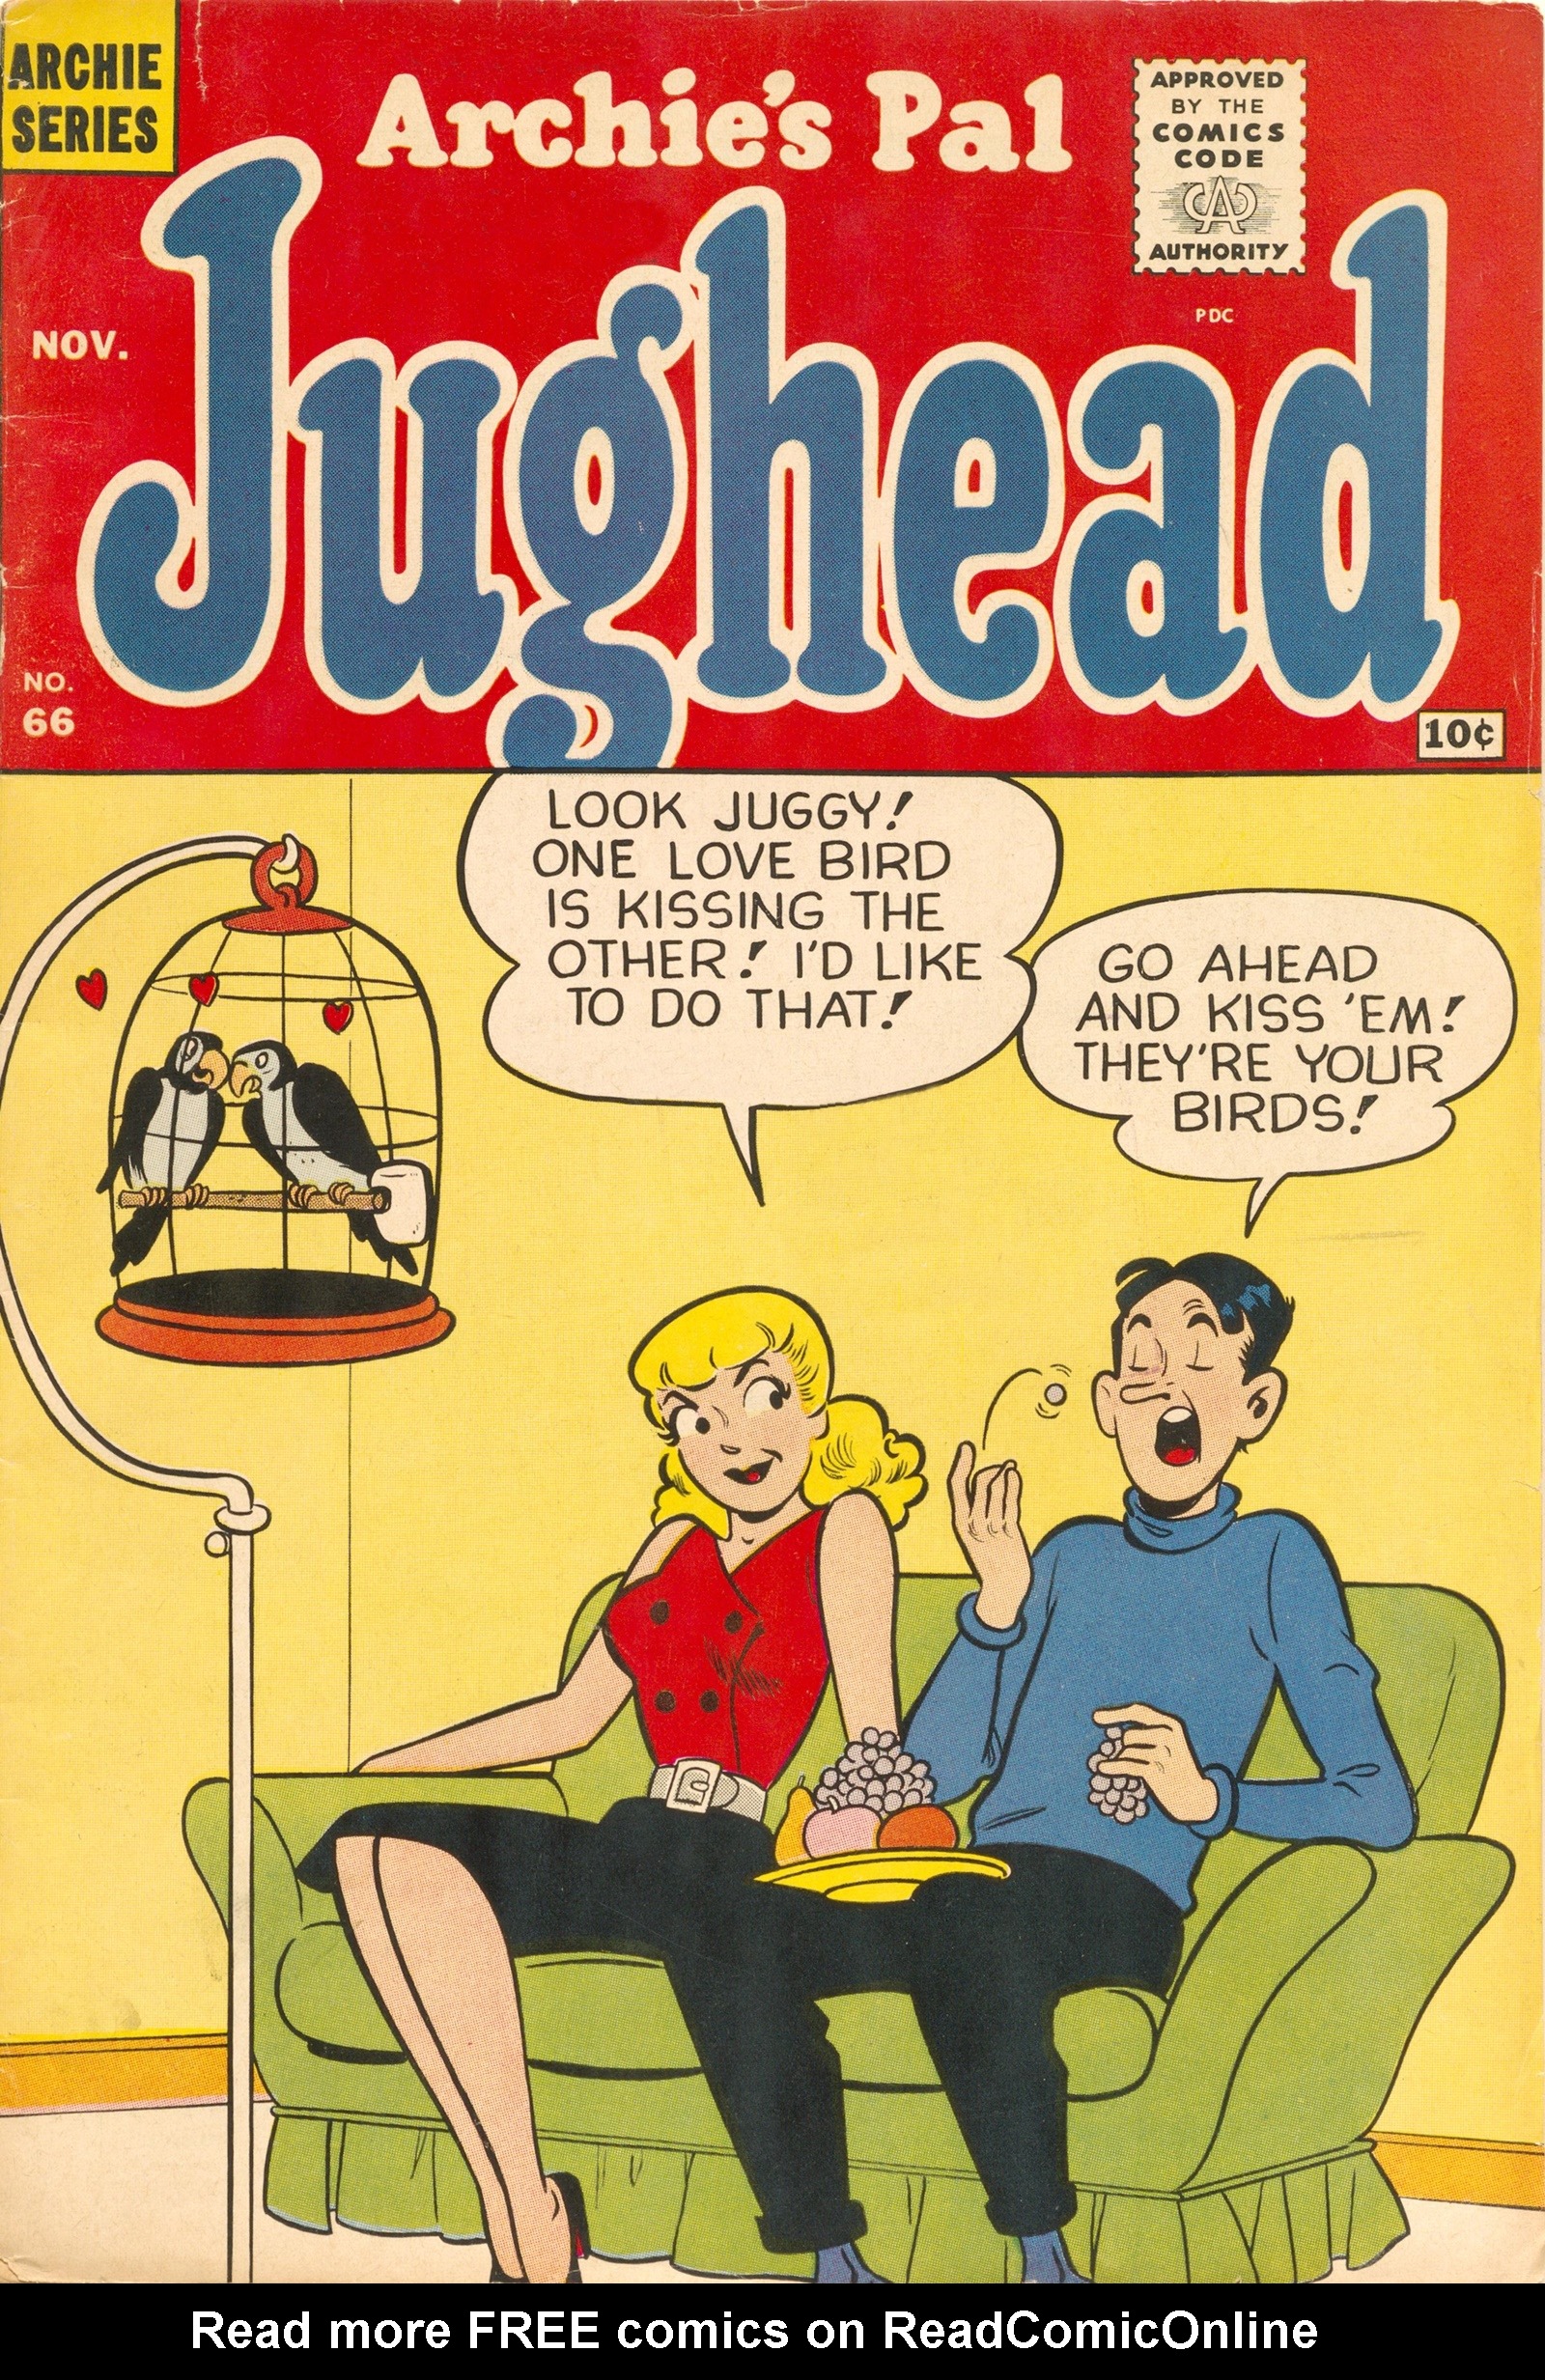 Read online Archie's Pal Jughead comic -  Issue #66 - 1